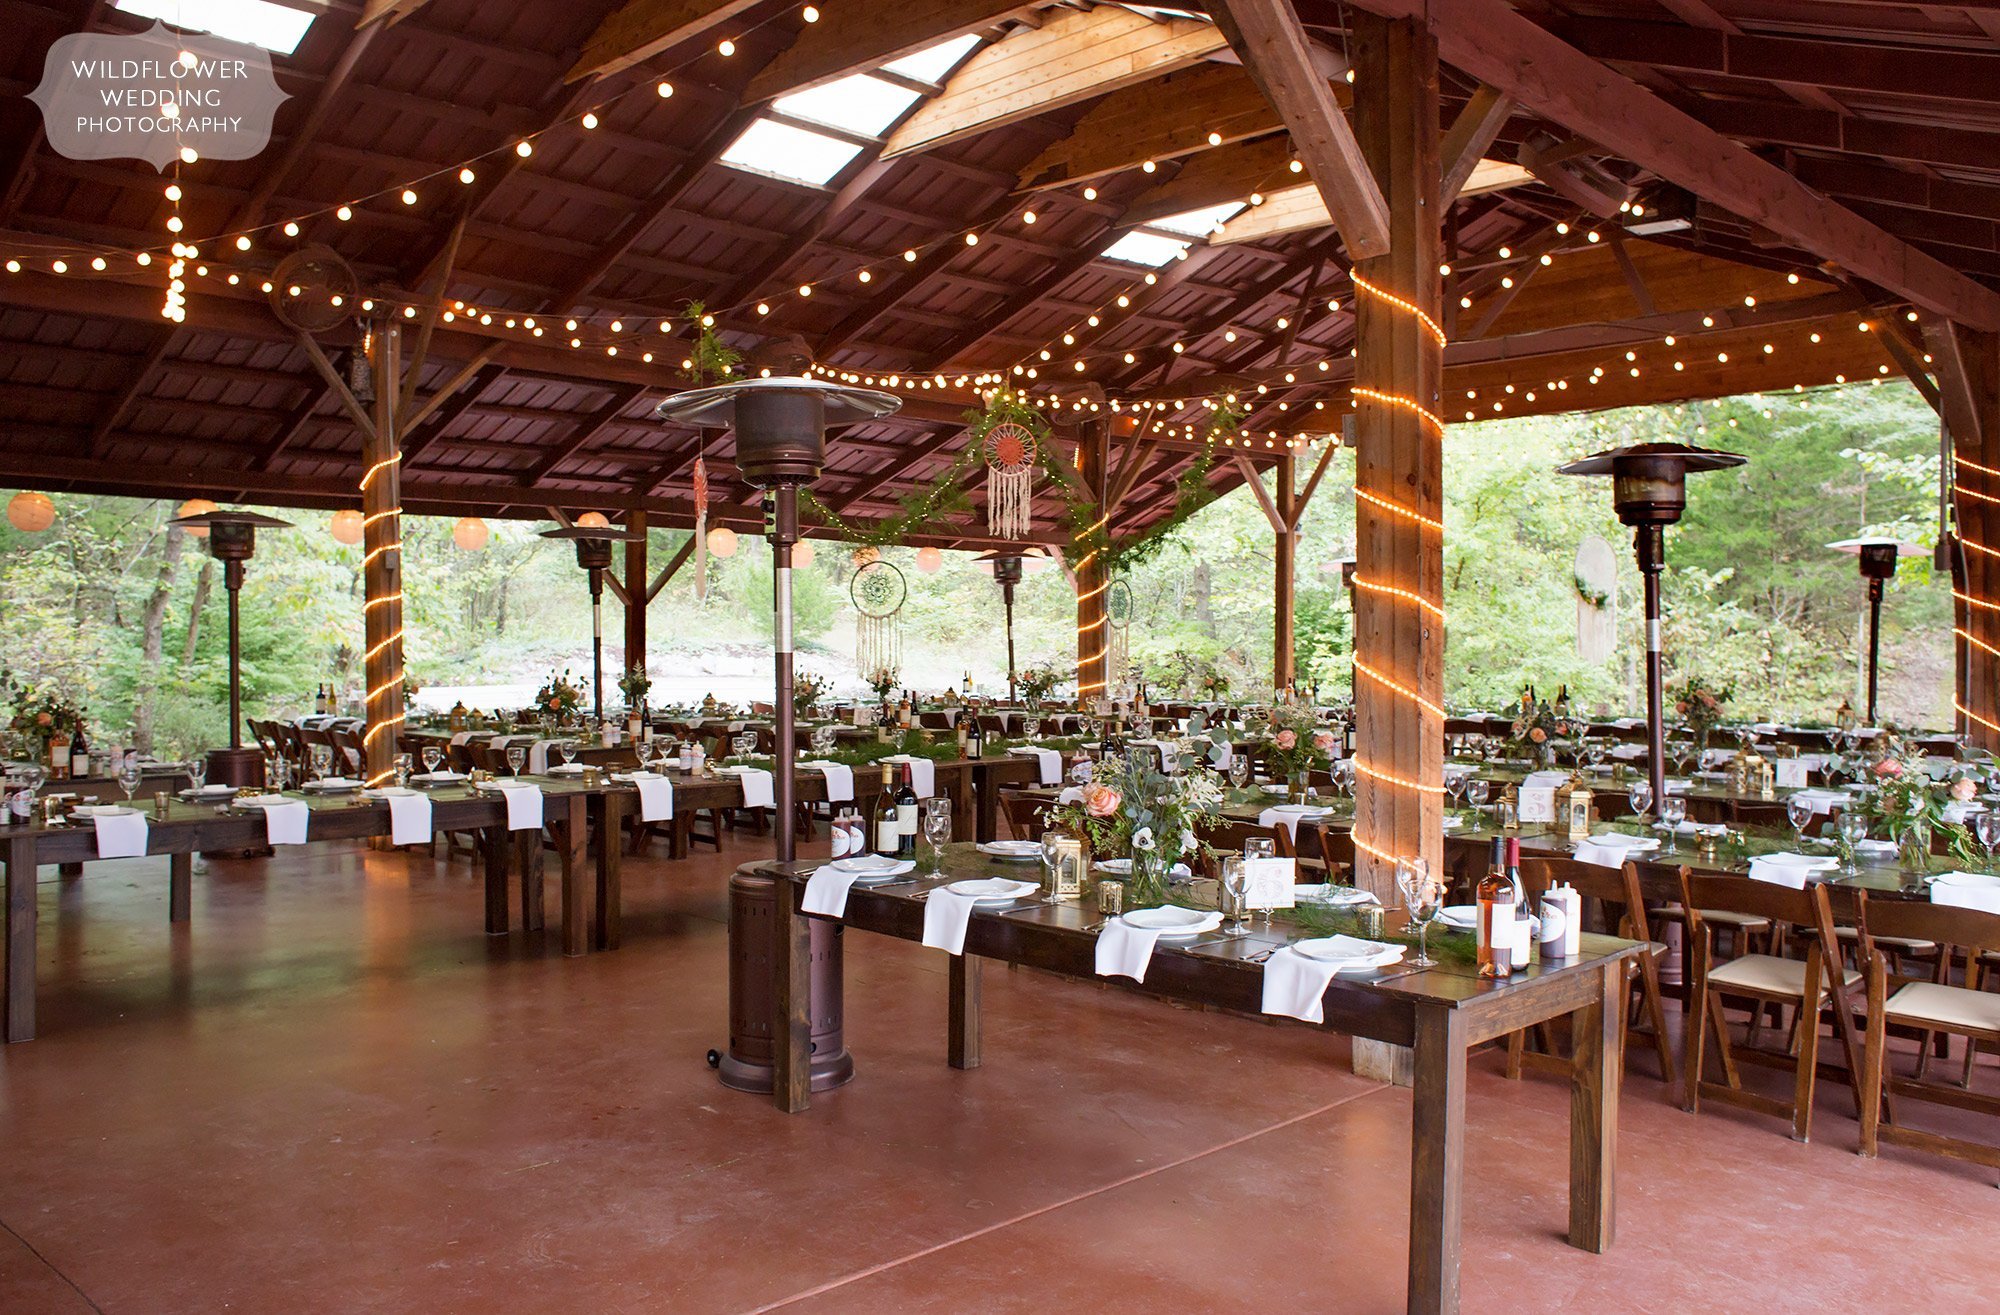 View of the inside of the Little Piney Lodge wedding pavilion with twinkle lights.